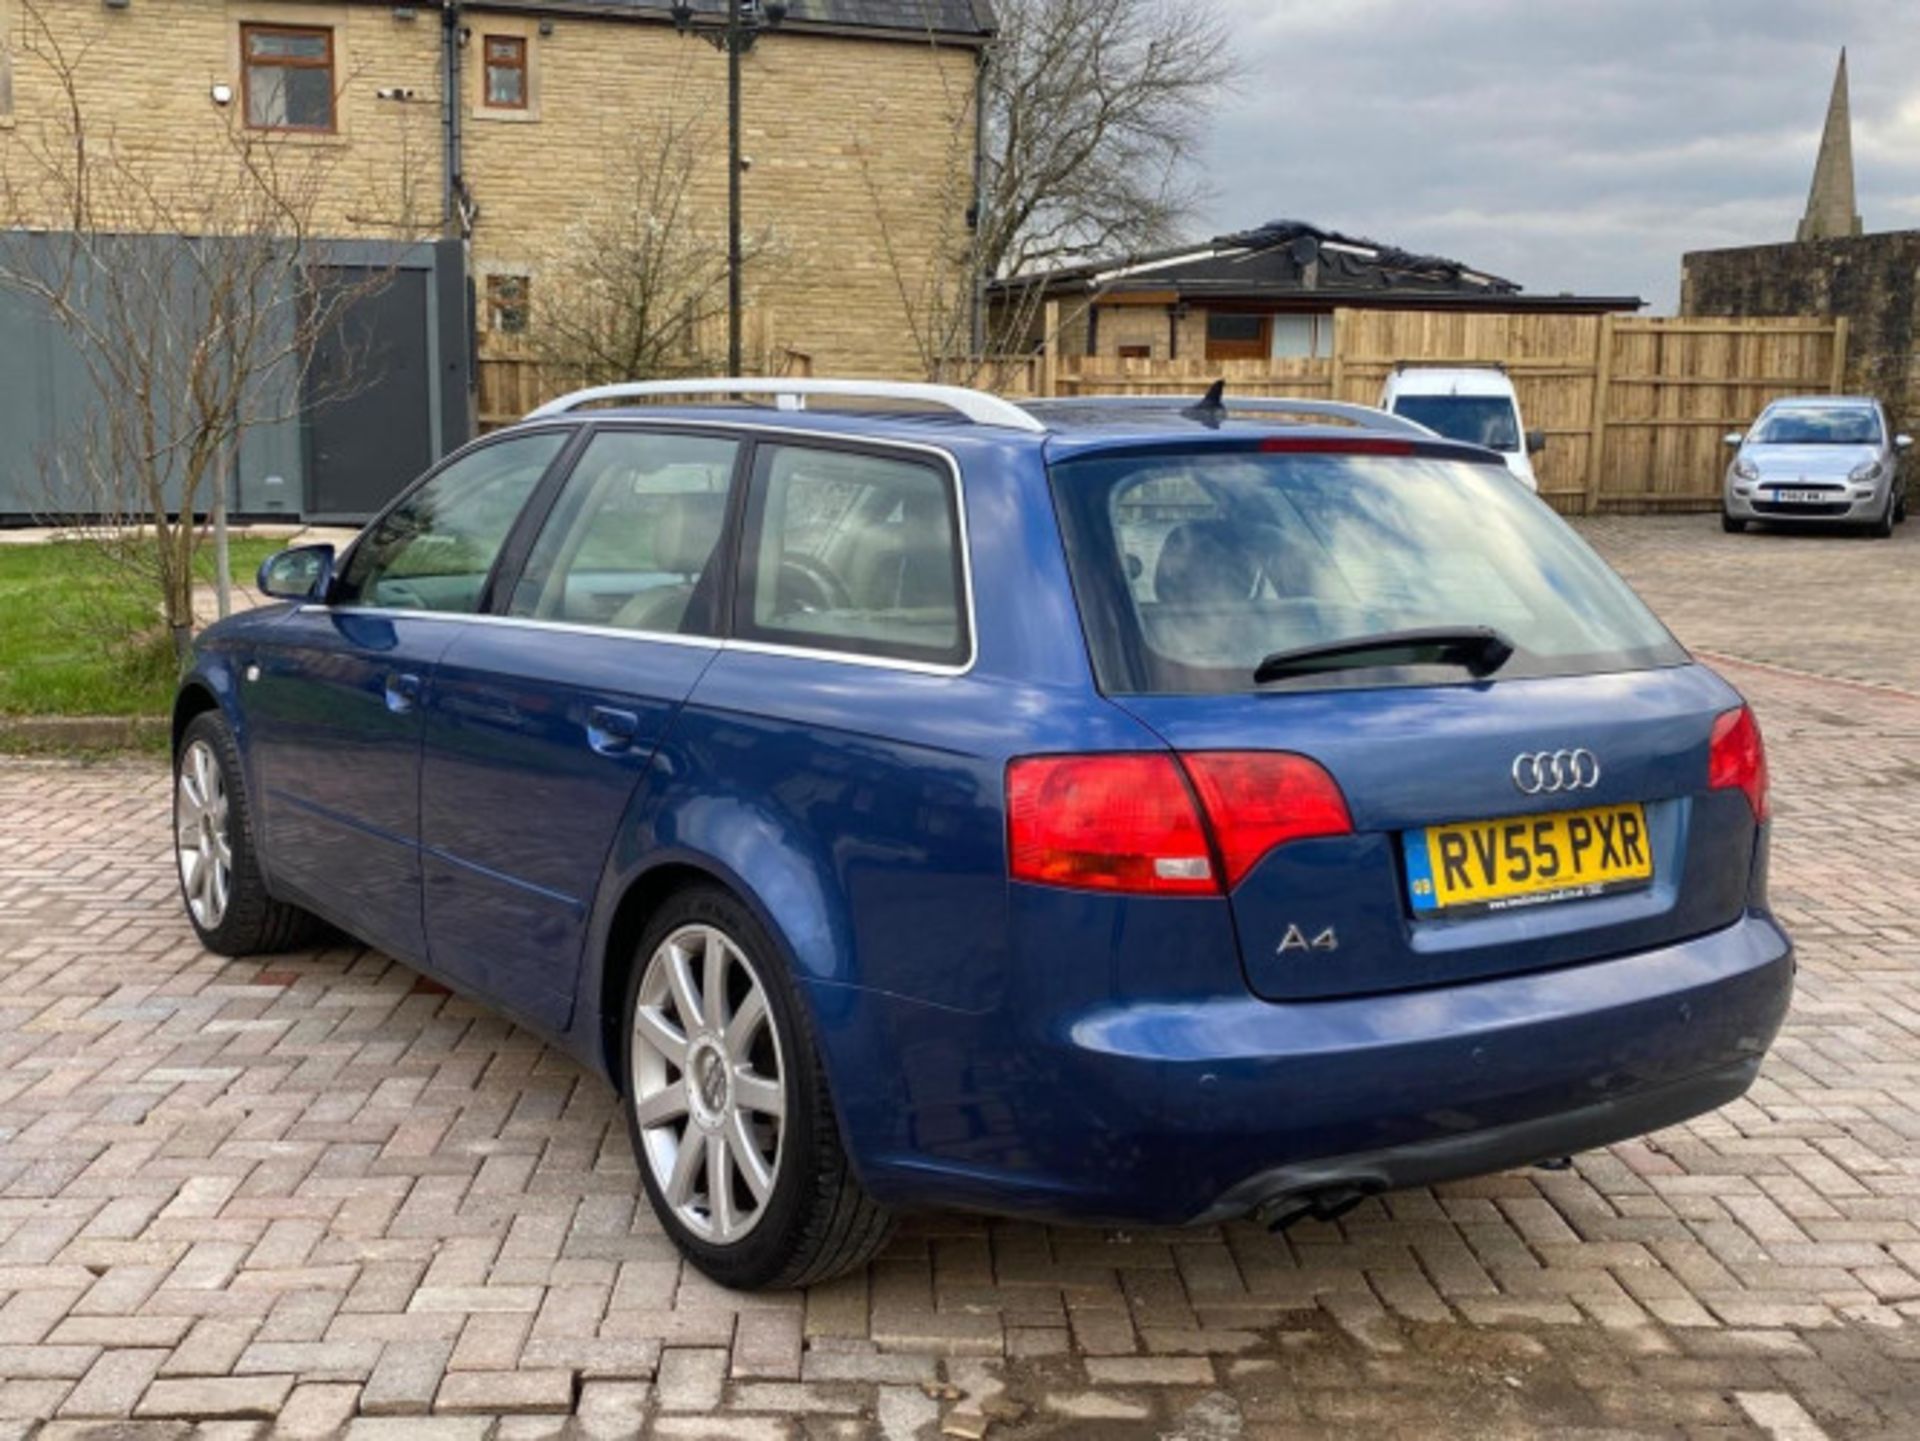 AUDI A4 AVANT 1.9 TDI SE 5DR ESTATE - RARE AND RELIABLE LUXURY WAGON >>--NO VAT ON HAMMER--<< - Image 91 of 97